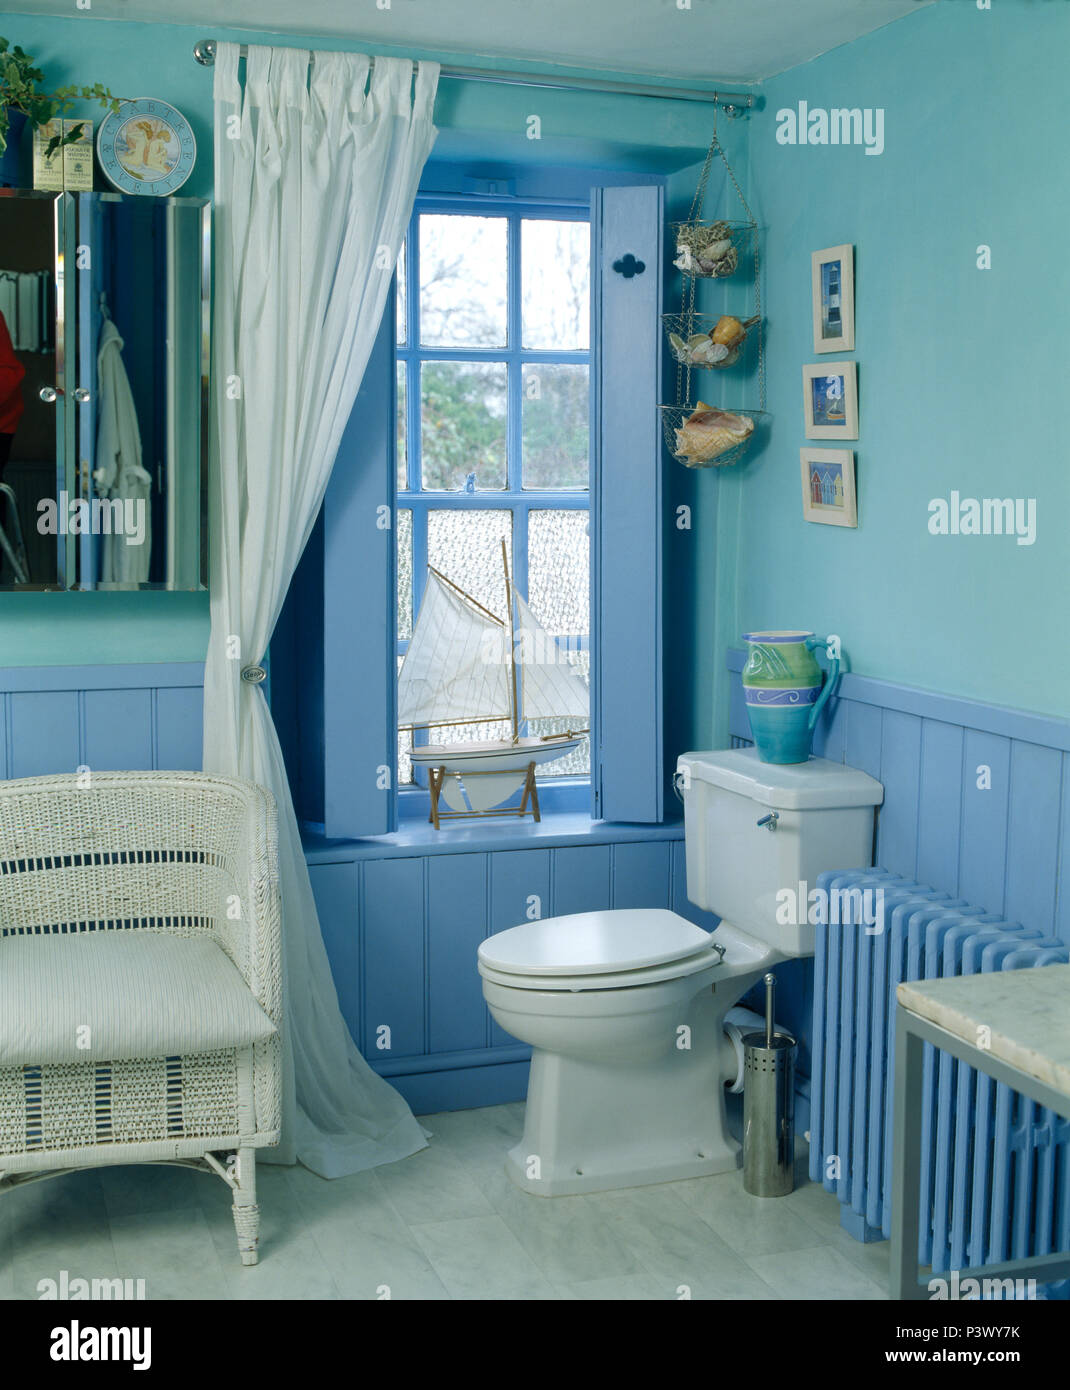 wcker-chair-beside-white-curtains-on-window-with-painted-shutters-in-blue-bathroom-with-tonguegroove-paneling-P3WY7K.jpg